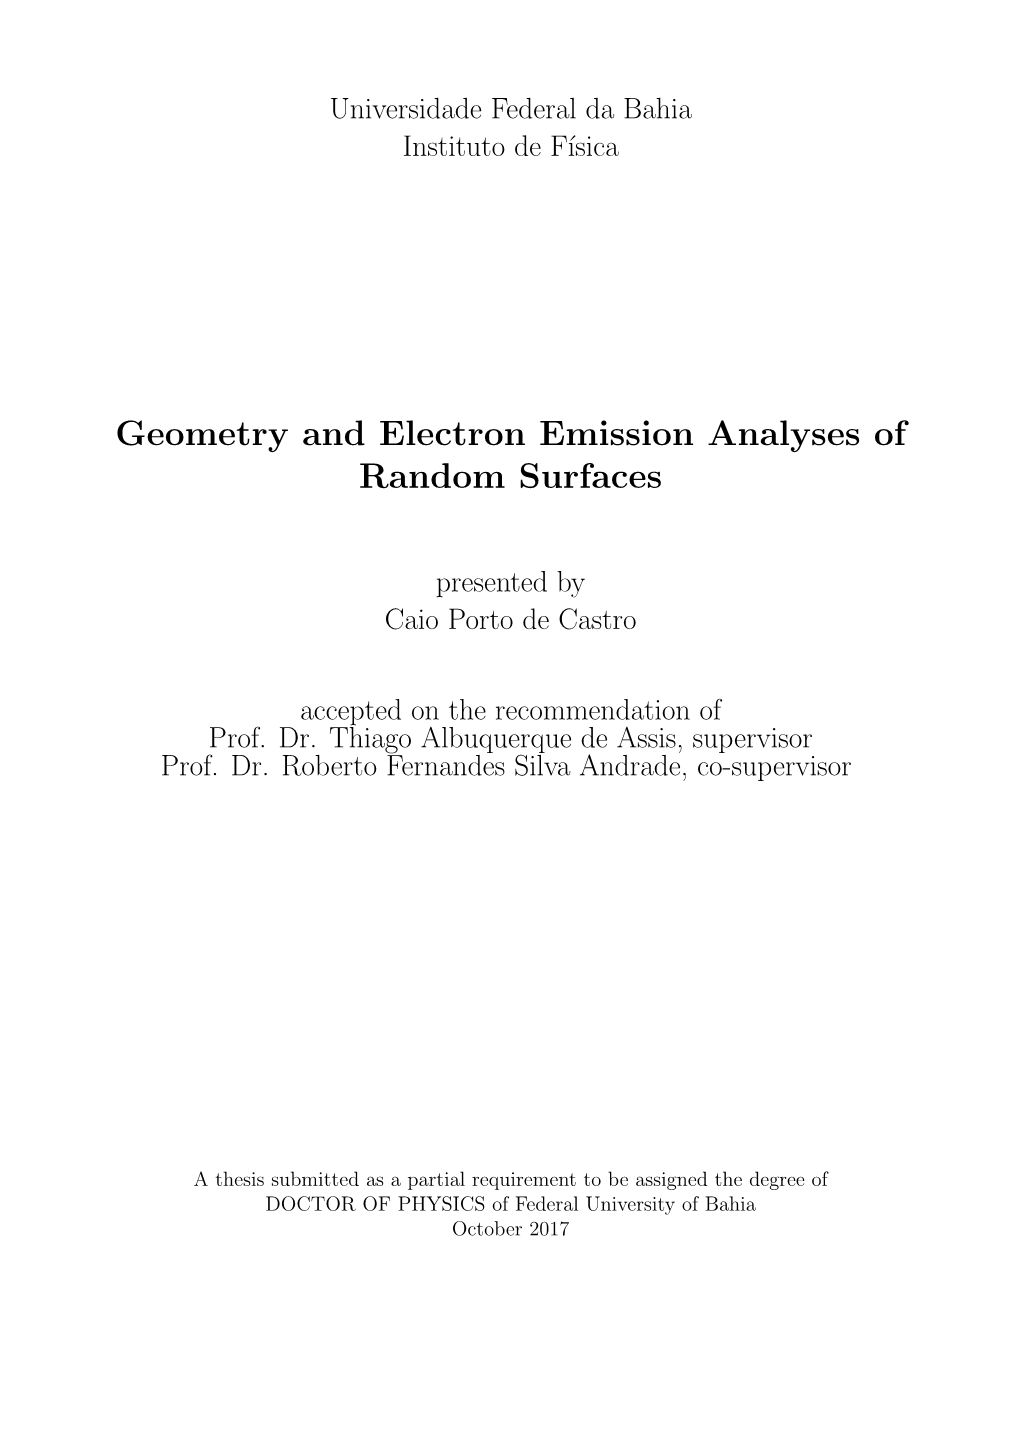 Geometry and Electron Emission Analyses of Random Surfaces